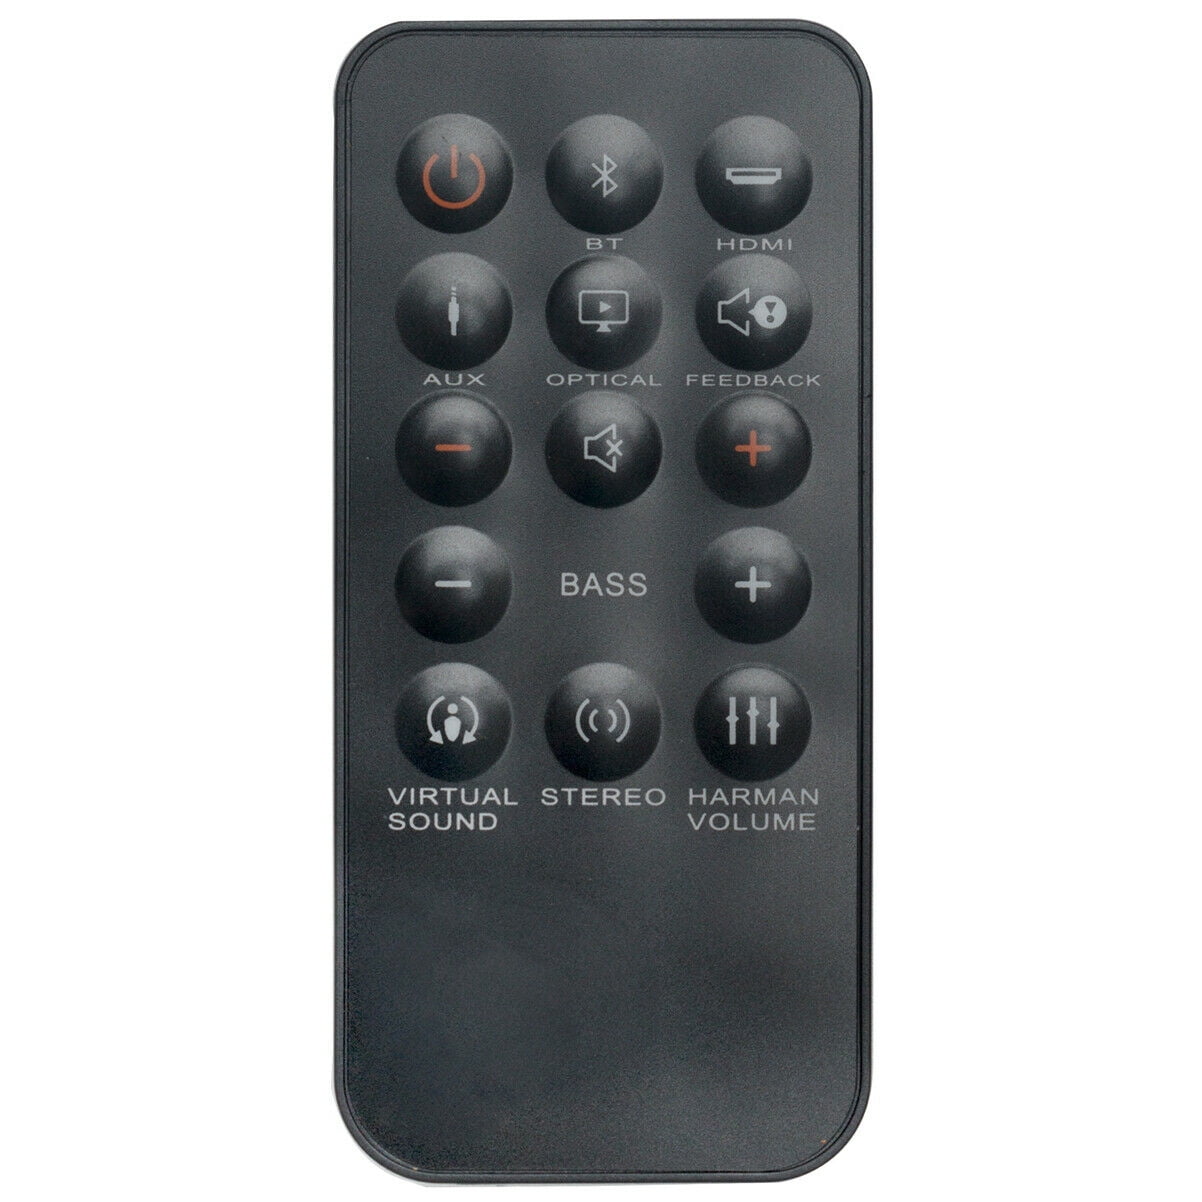 New Replacement Remote Control Applicable for JBL Cinema Walmart.com